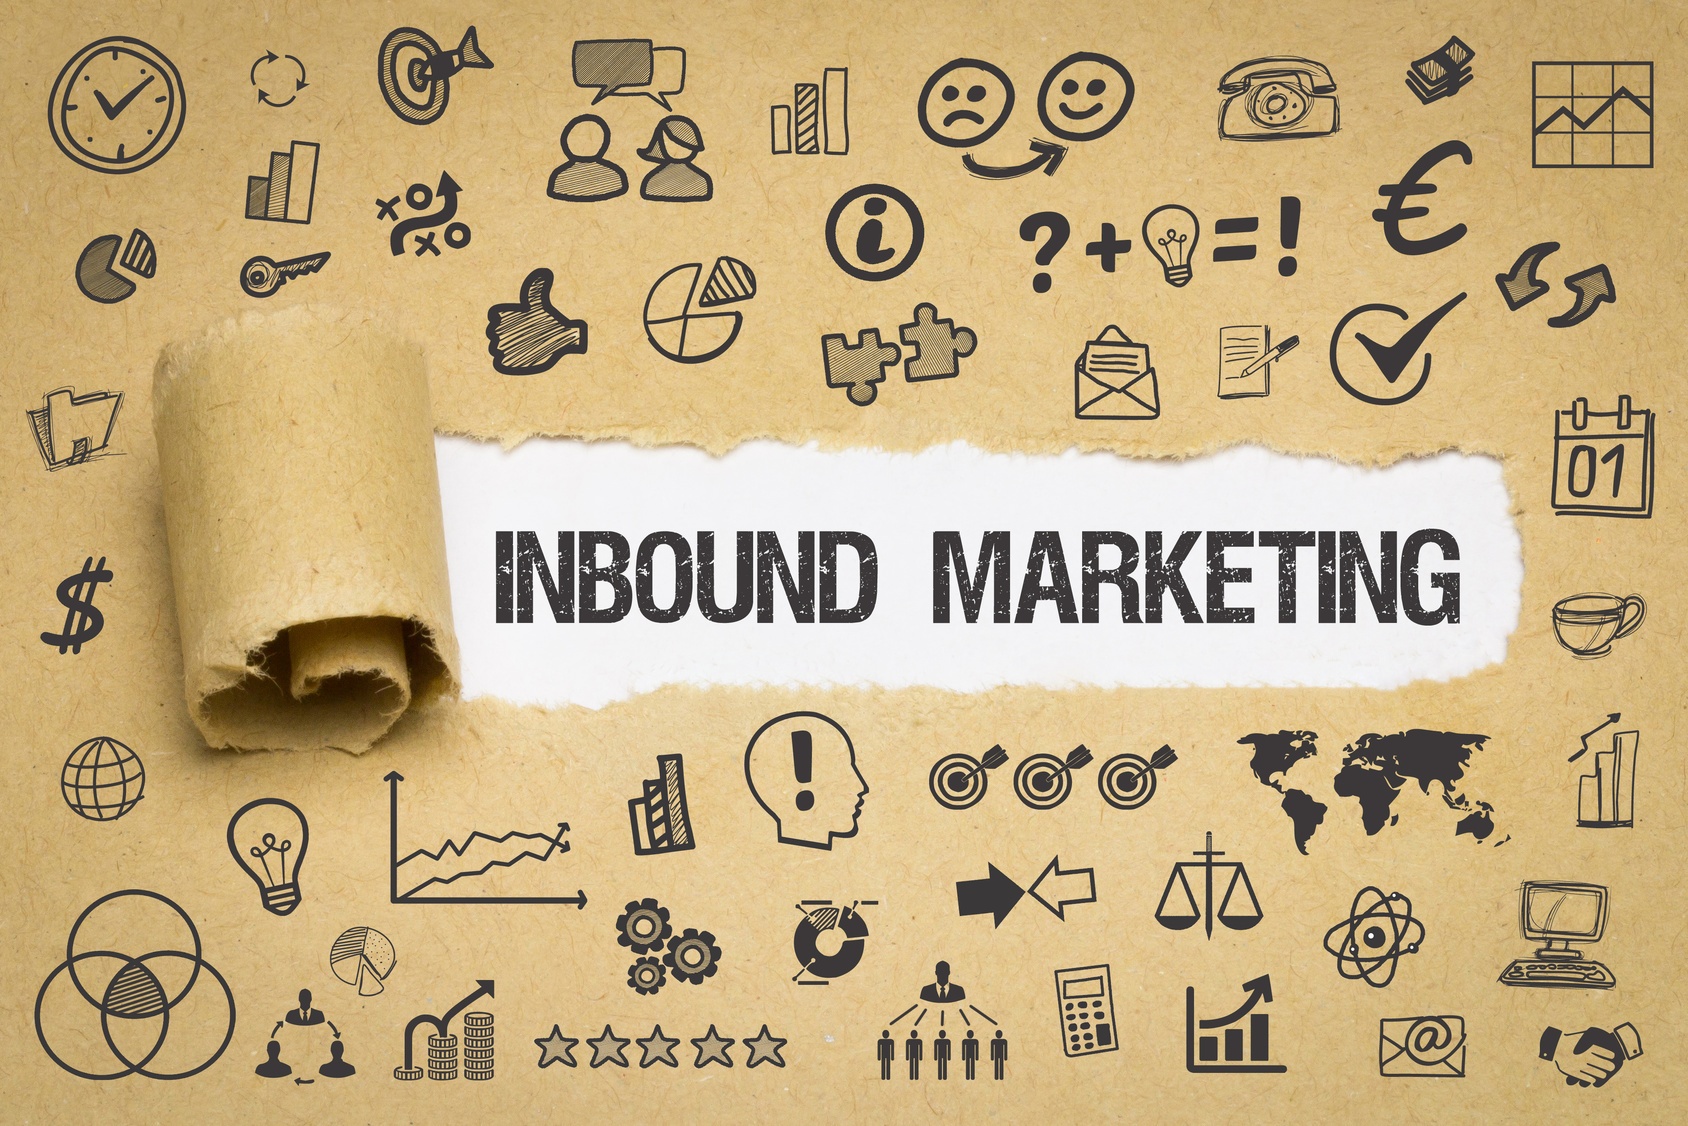 A Few Of Your Favorite Things - Inbound Marketing Gifts From Us